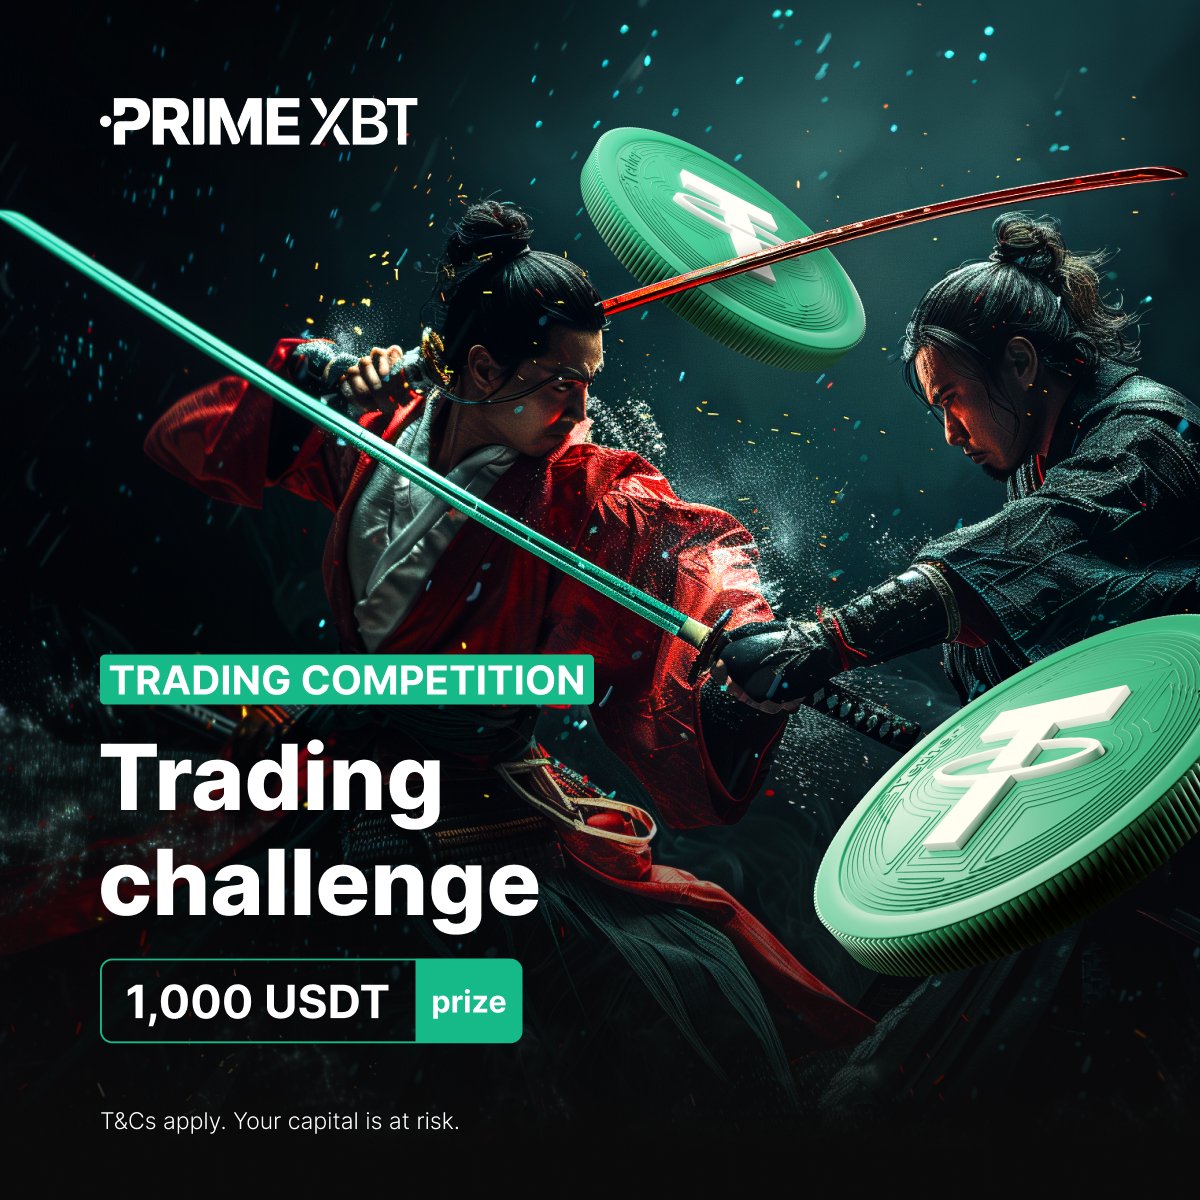 🧗‍♂️ Improve your trading strategy and rise to the top.

Step up to the challenge in our trading competition. Compete against traders worldwide and aim for the 1,000 #USDT prize.

🏁 Enter now: eng.primexbt.com/42zoaWW

#PrimeXBT #Trading #TheNewPrimeXBT